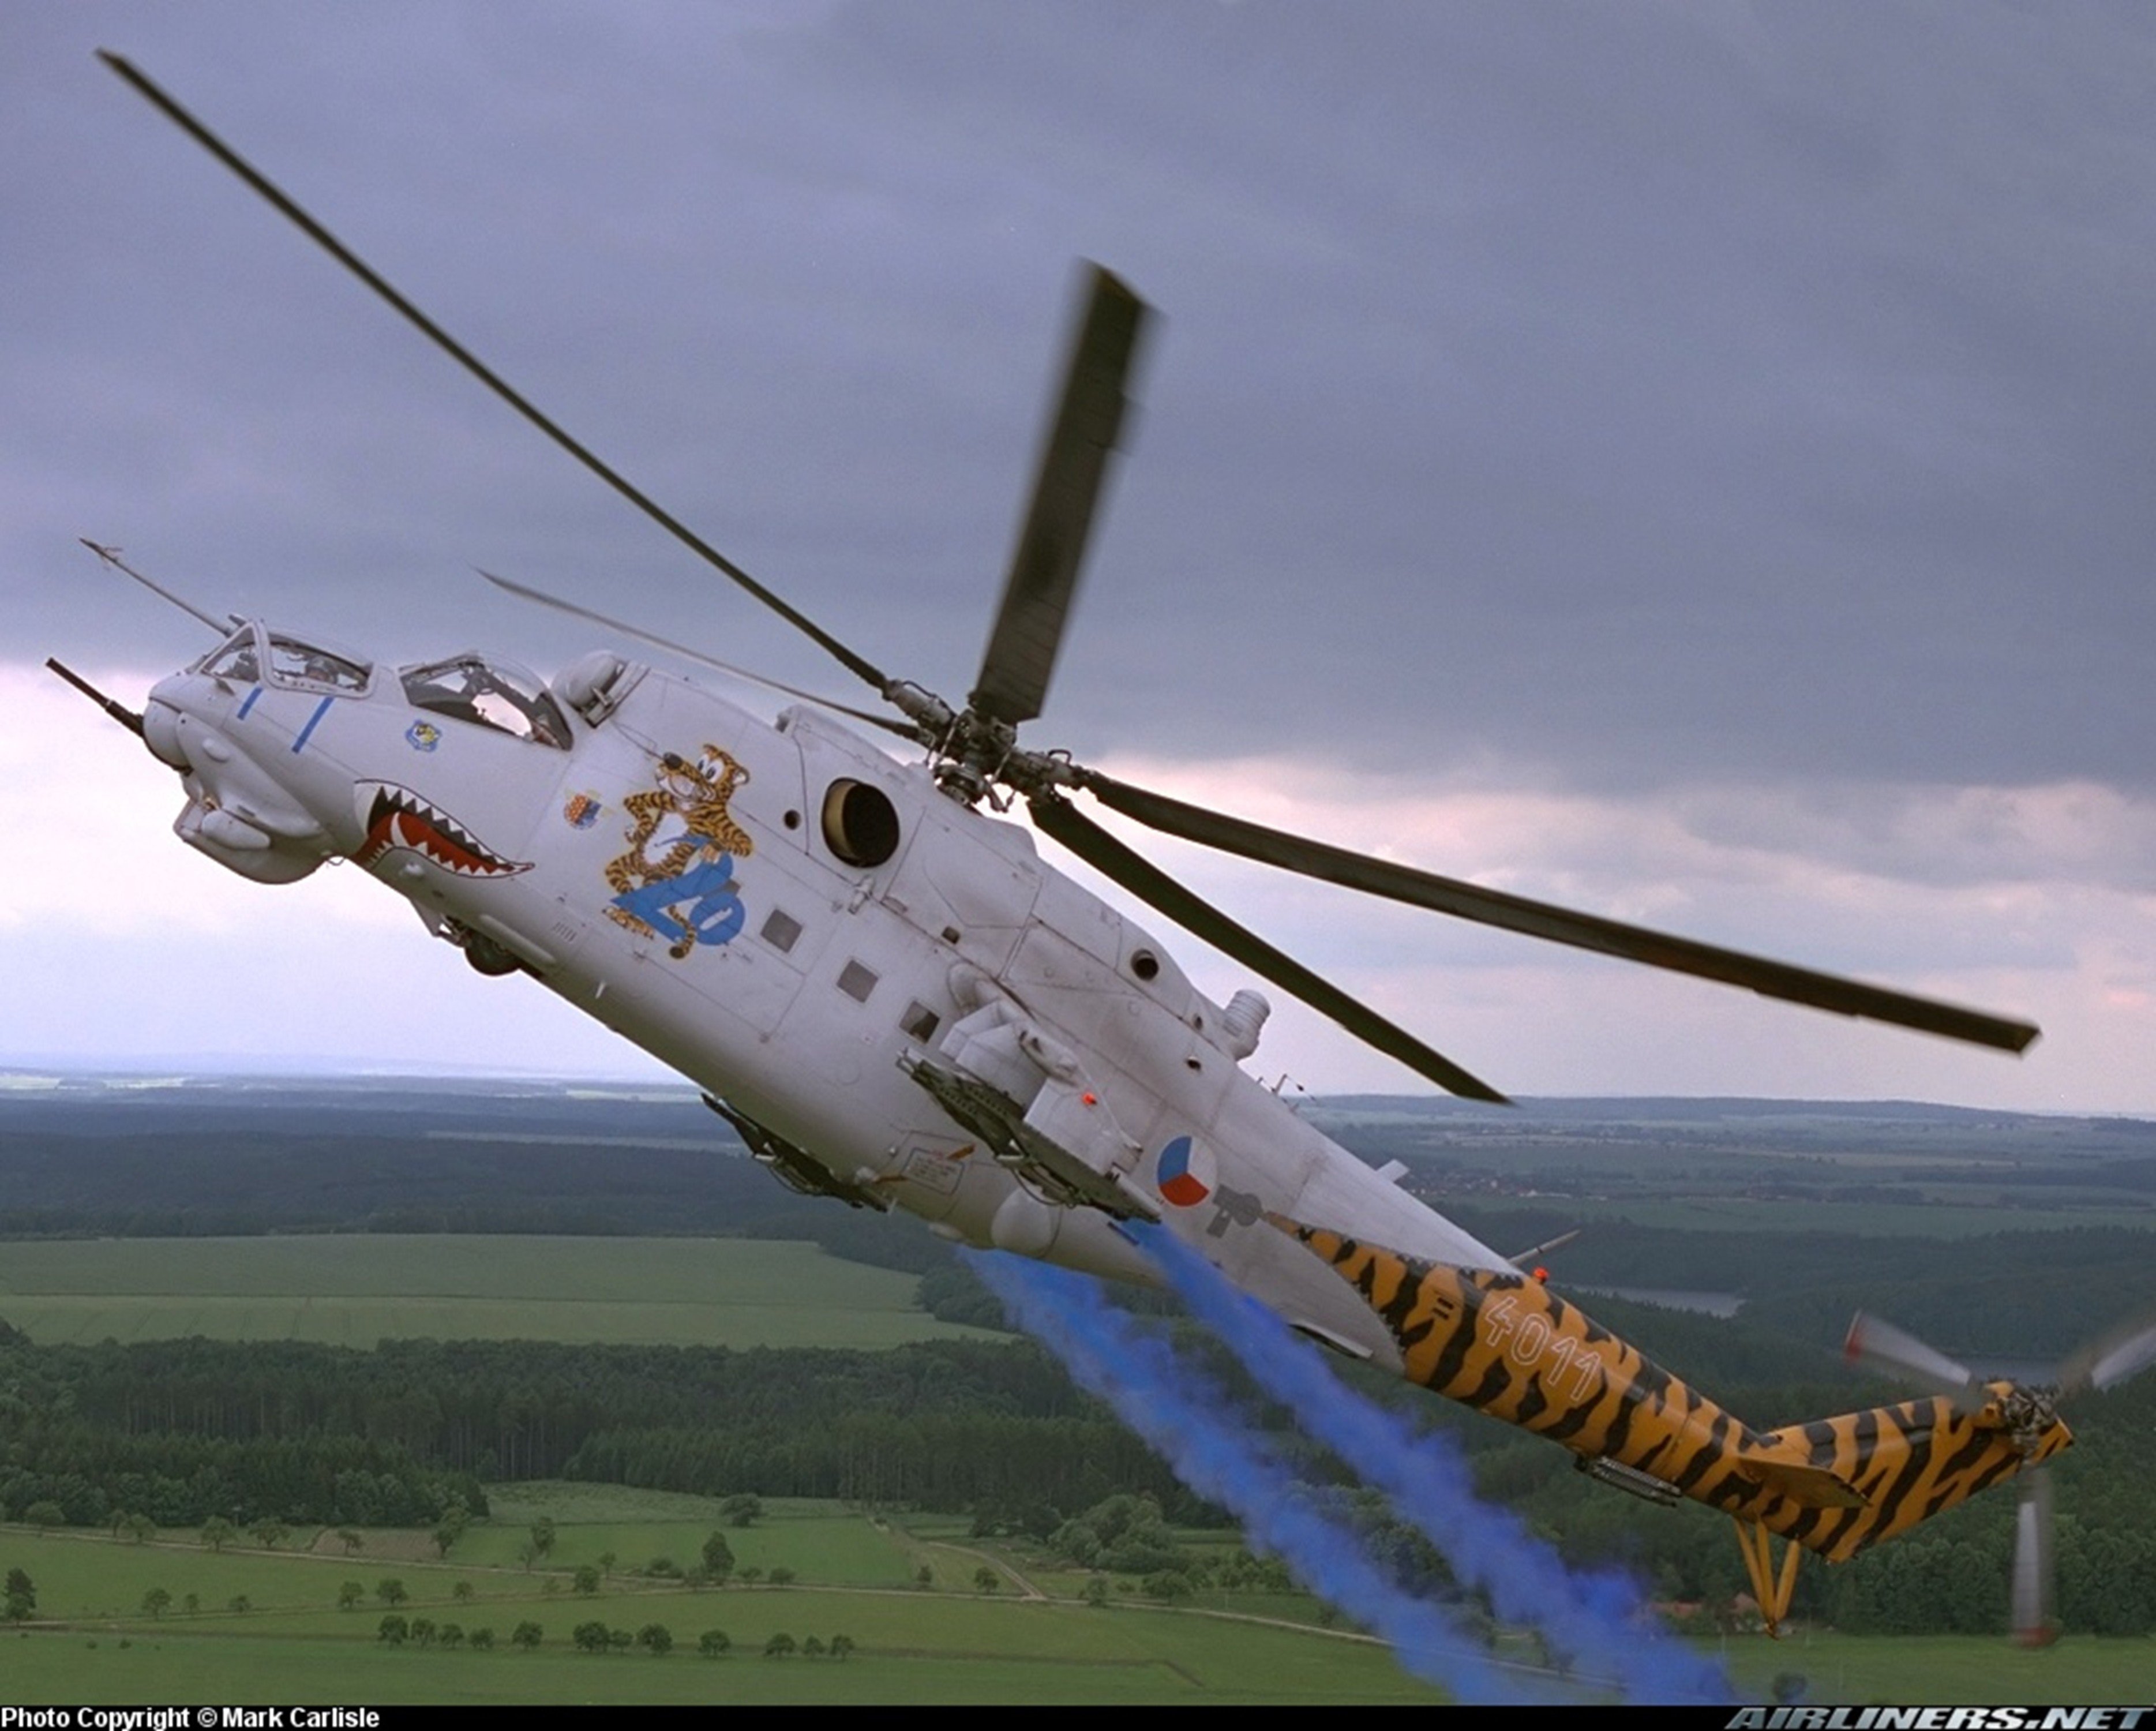 helicopter, Aircraft, Attack, Mil mi, Military, Army, Czech republic Wallpaper